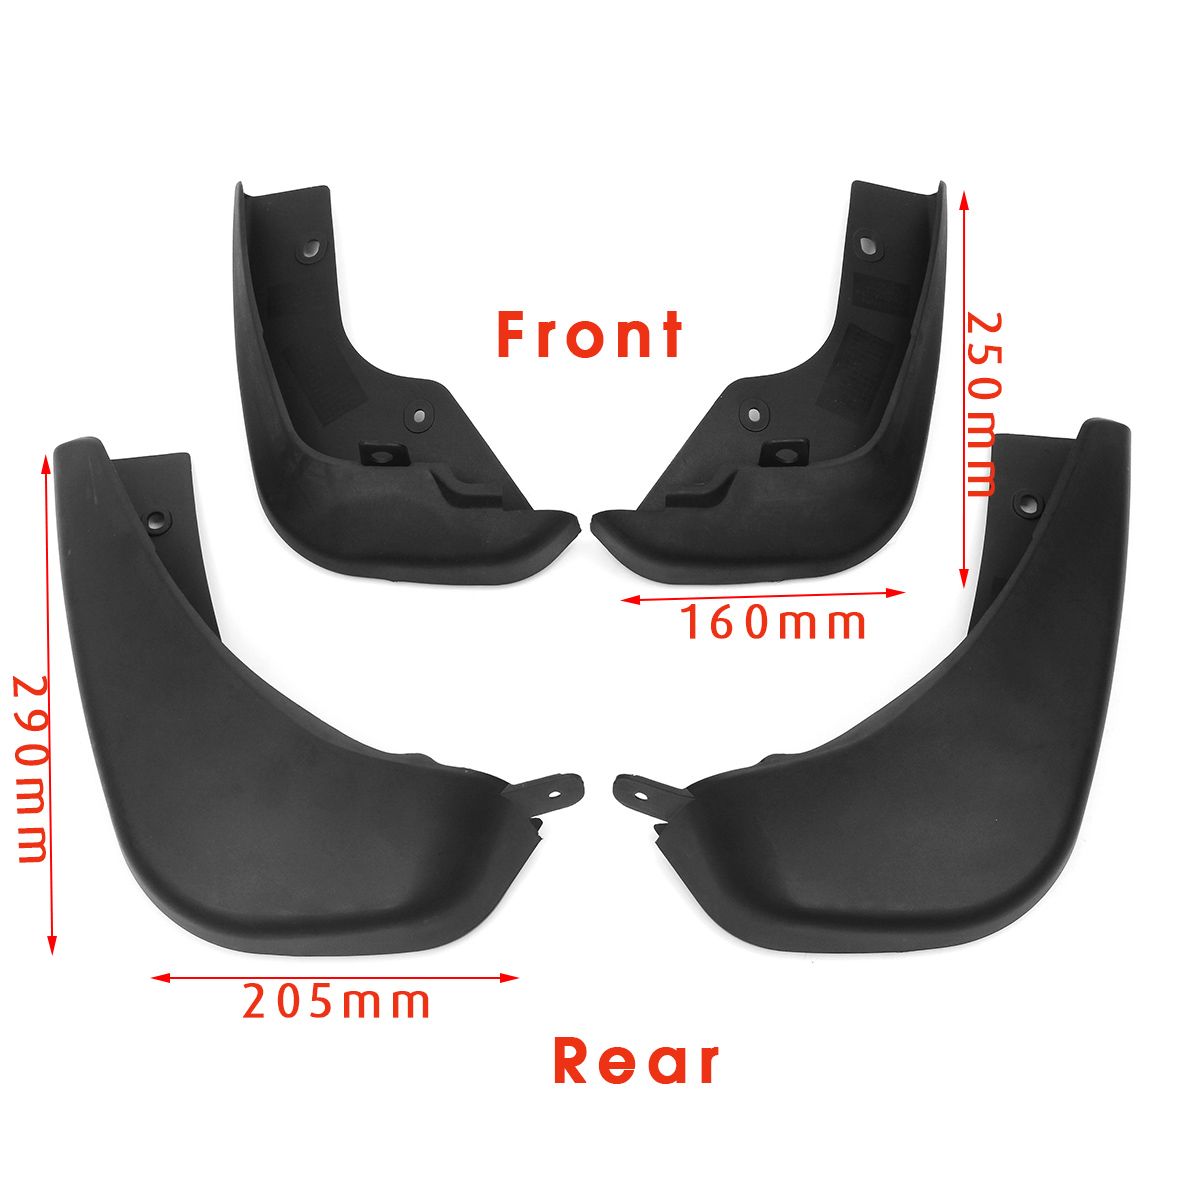 Front-Rear-Car-Mudguards-Flaps-For-Nissan-Juke-2010-2014-F15-1394419